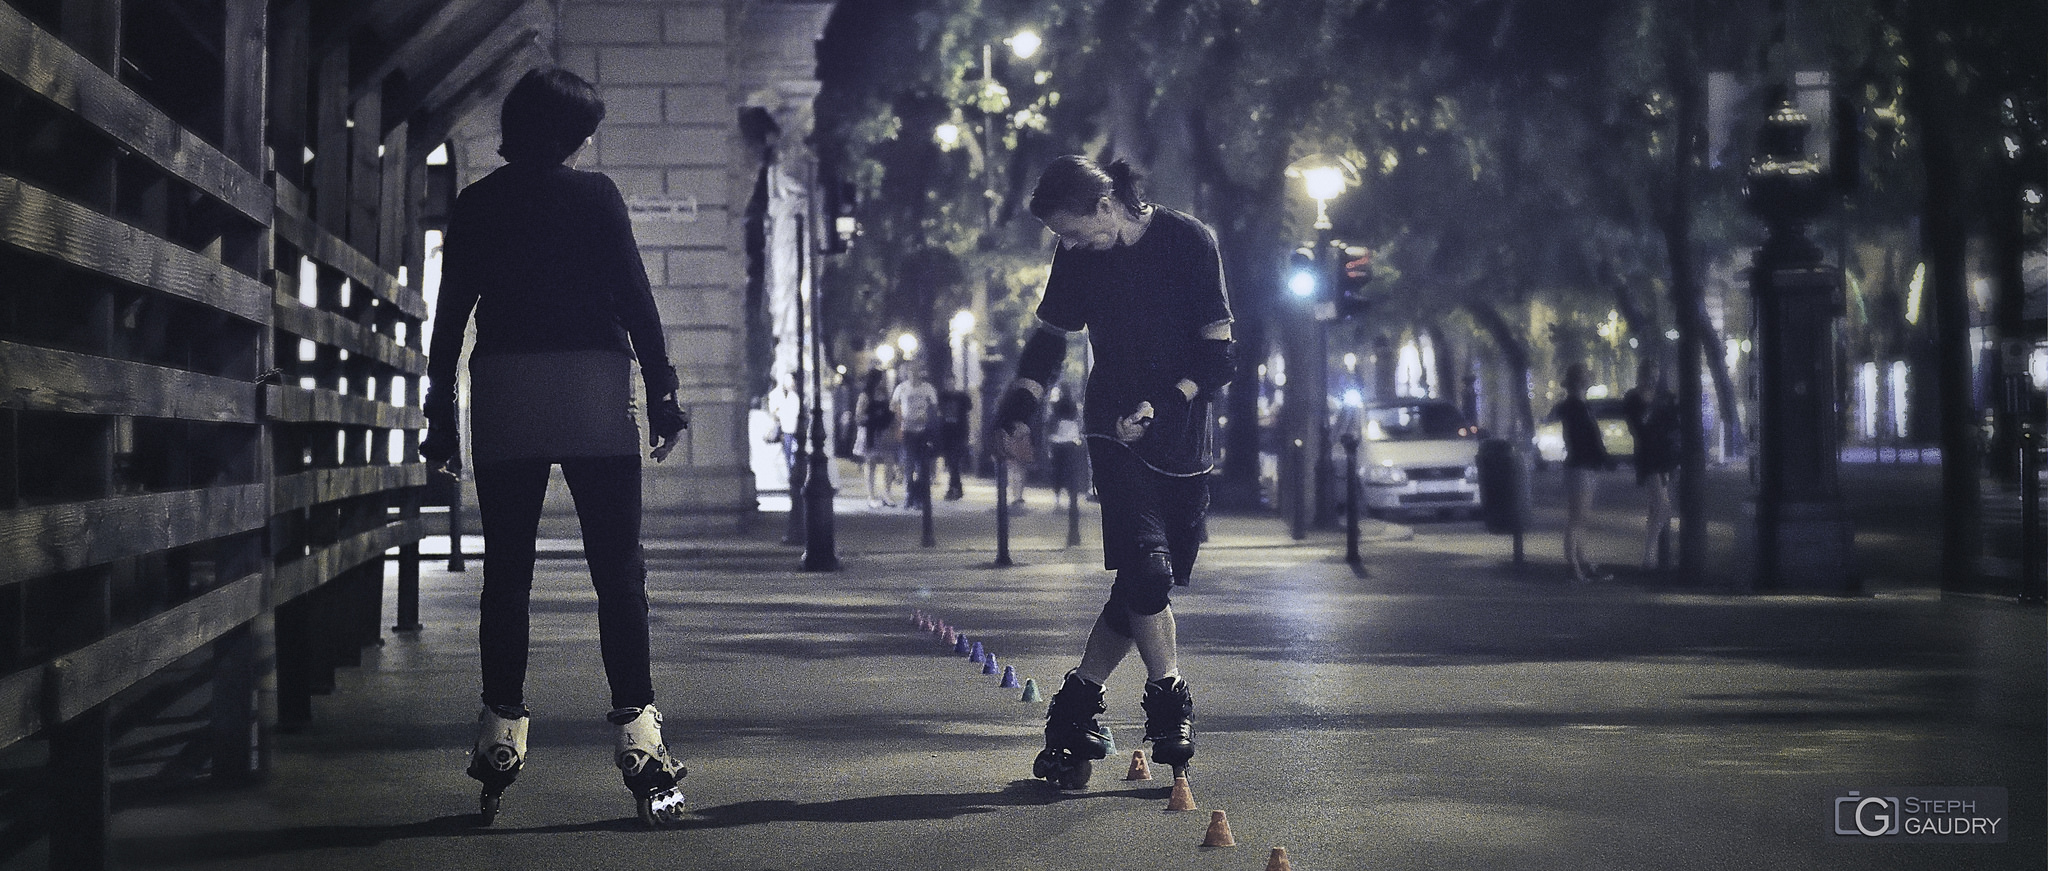 Skating in the streets of Budapest at night [Click to start slideshow]